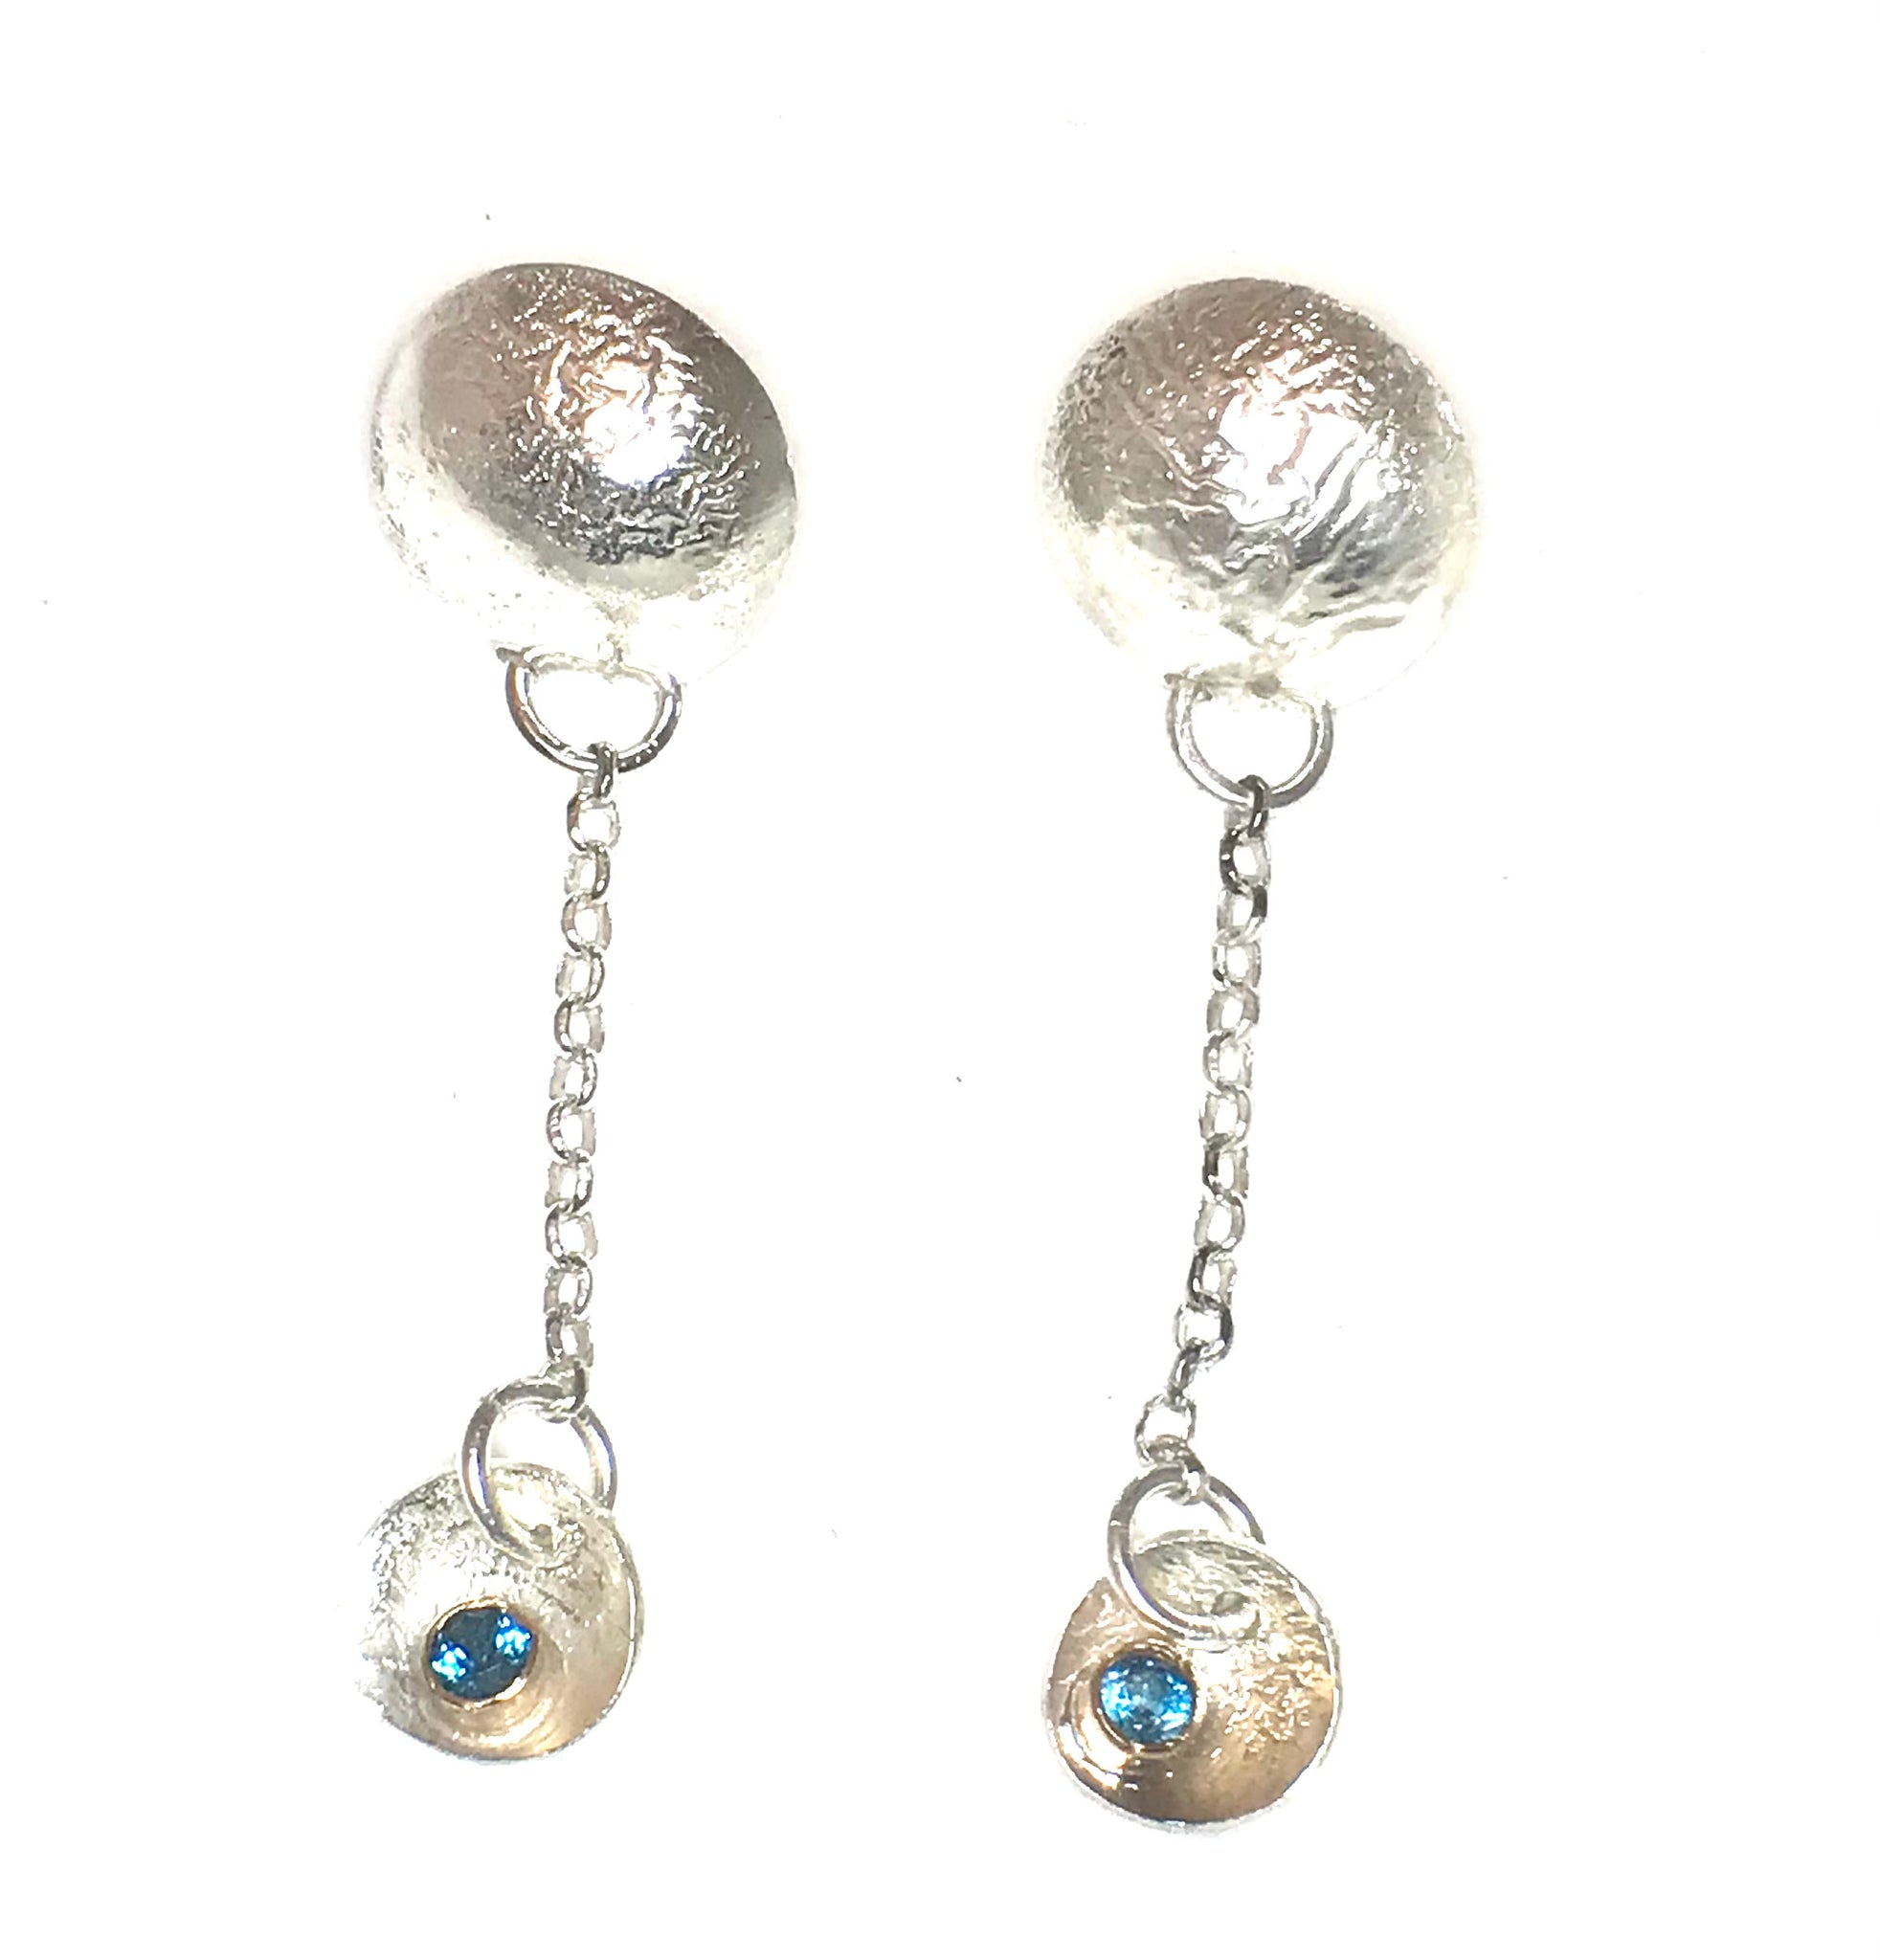 Earrings made from highly textured reticulated silver.  These earrings have posts attached to half domed moon shaped disks.   From the disks hang chain and then smaller disks in which are nestled a London blue topaz set in a gold tube set.